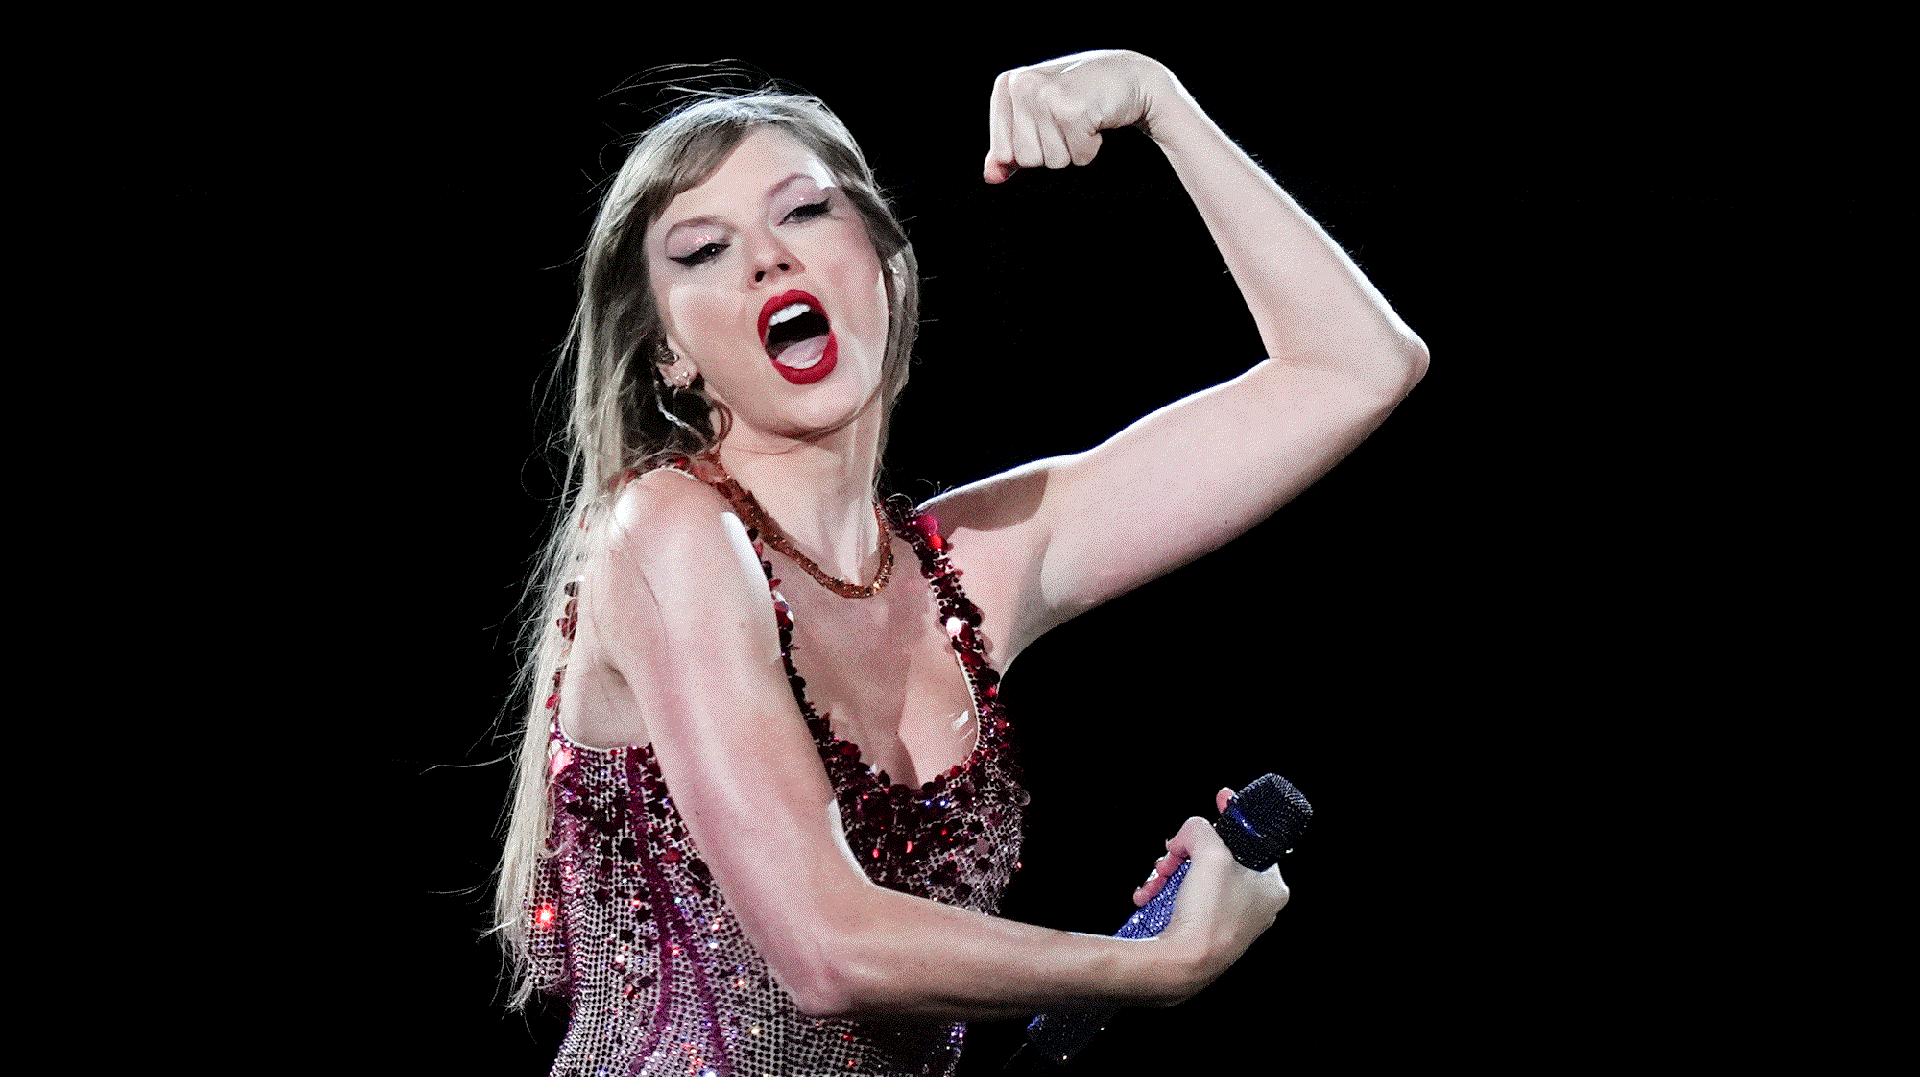 During a dynamic performance, Taylor Swift flexes muscles in her left arm as she sings